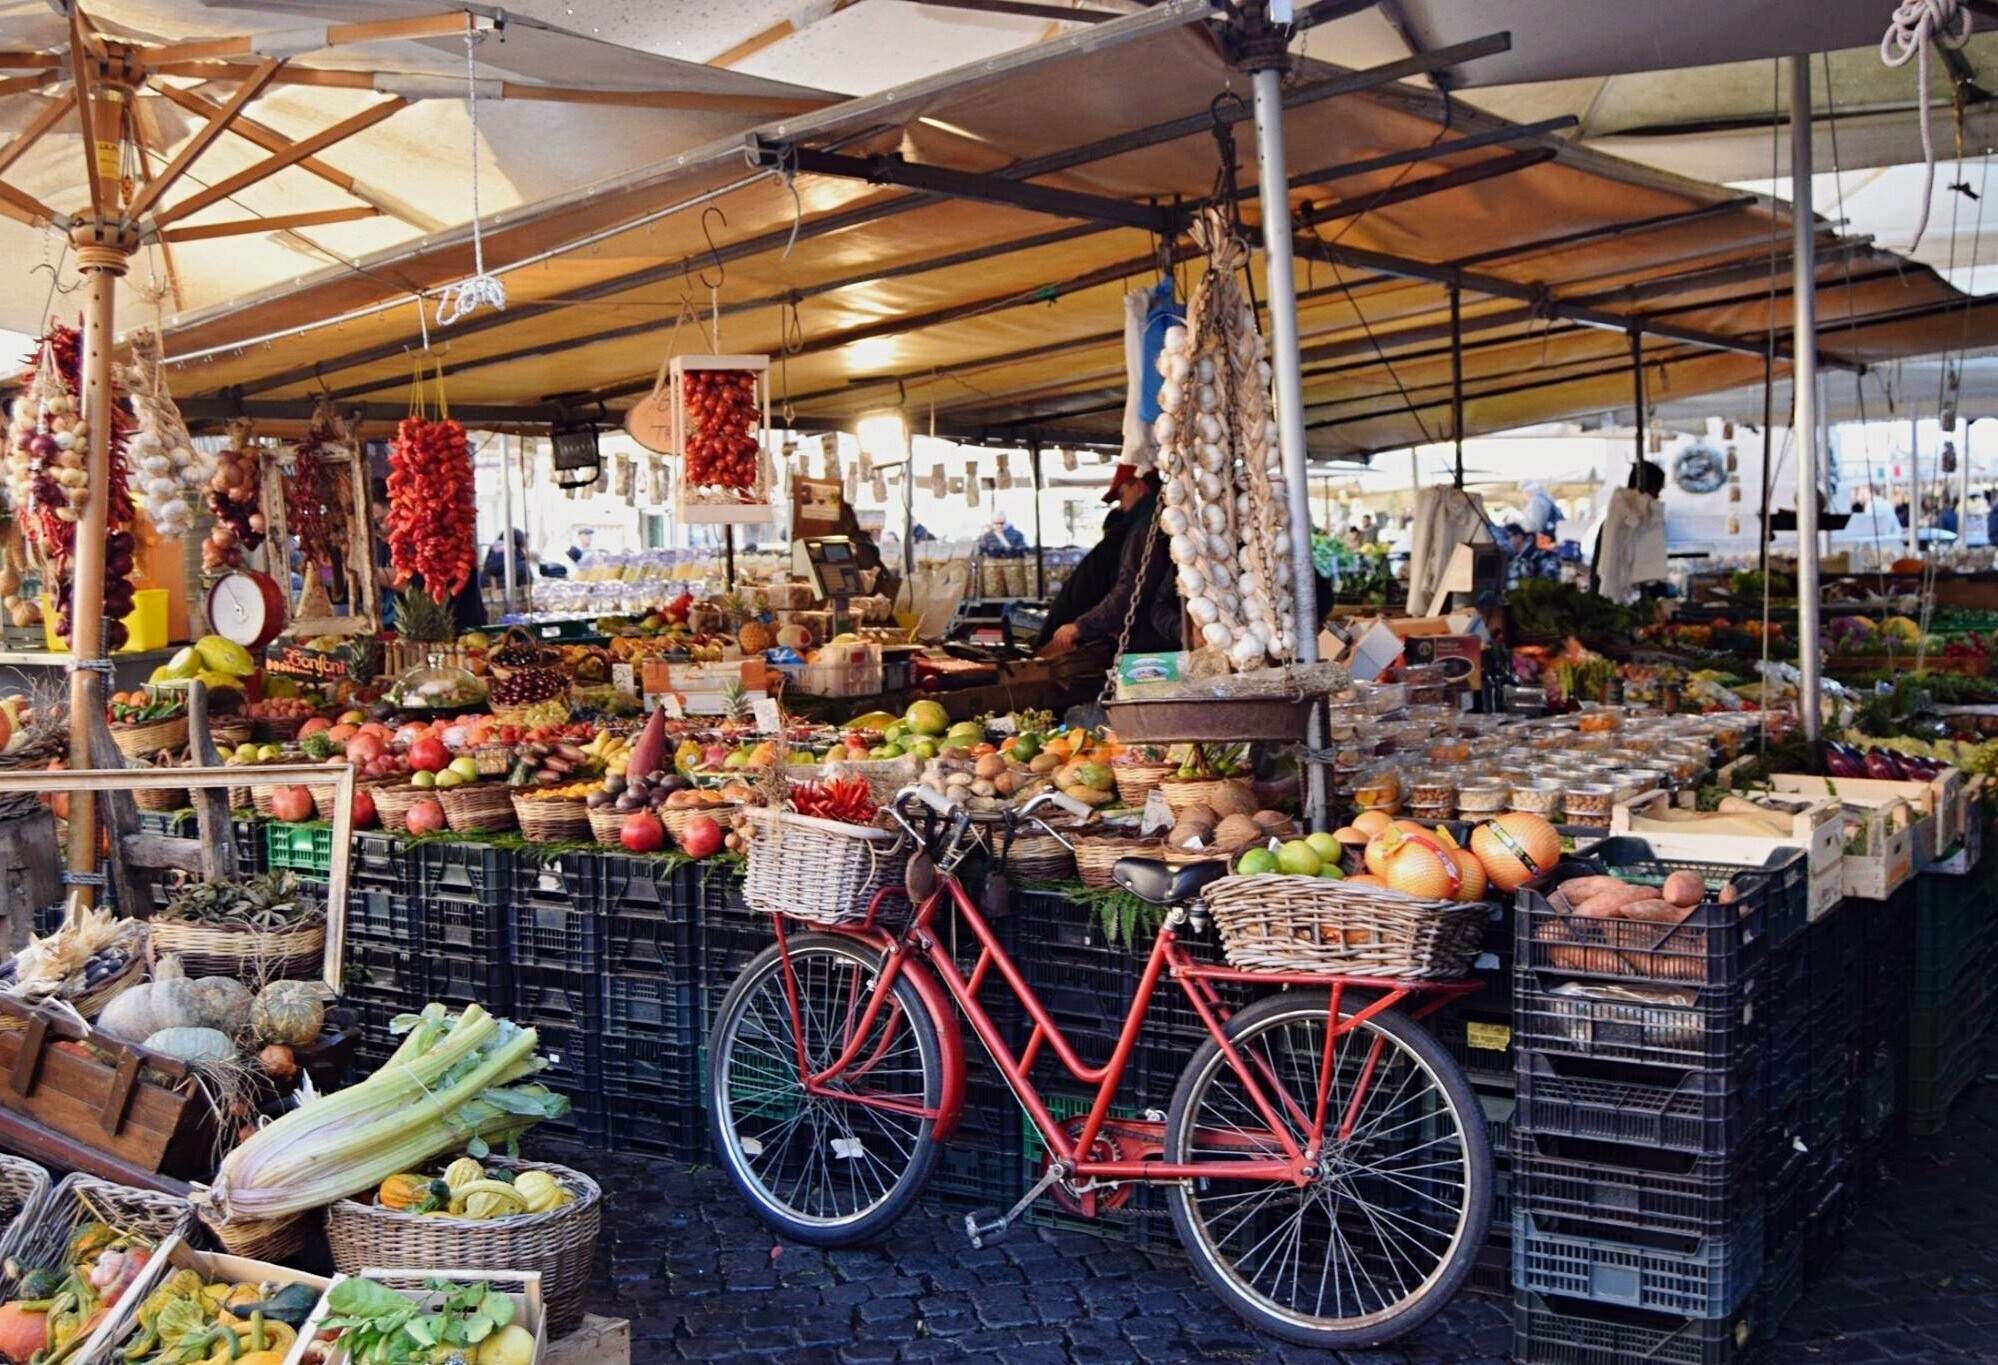 A tent with a display of assorted fruits for sale beside a bicycle with baskets full of products.